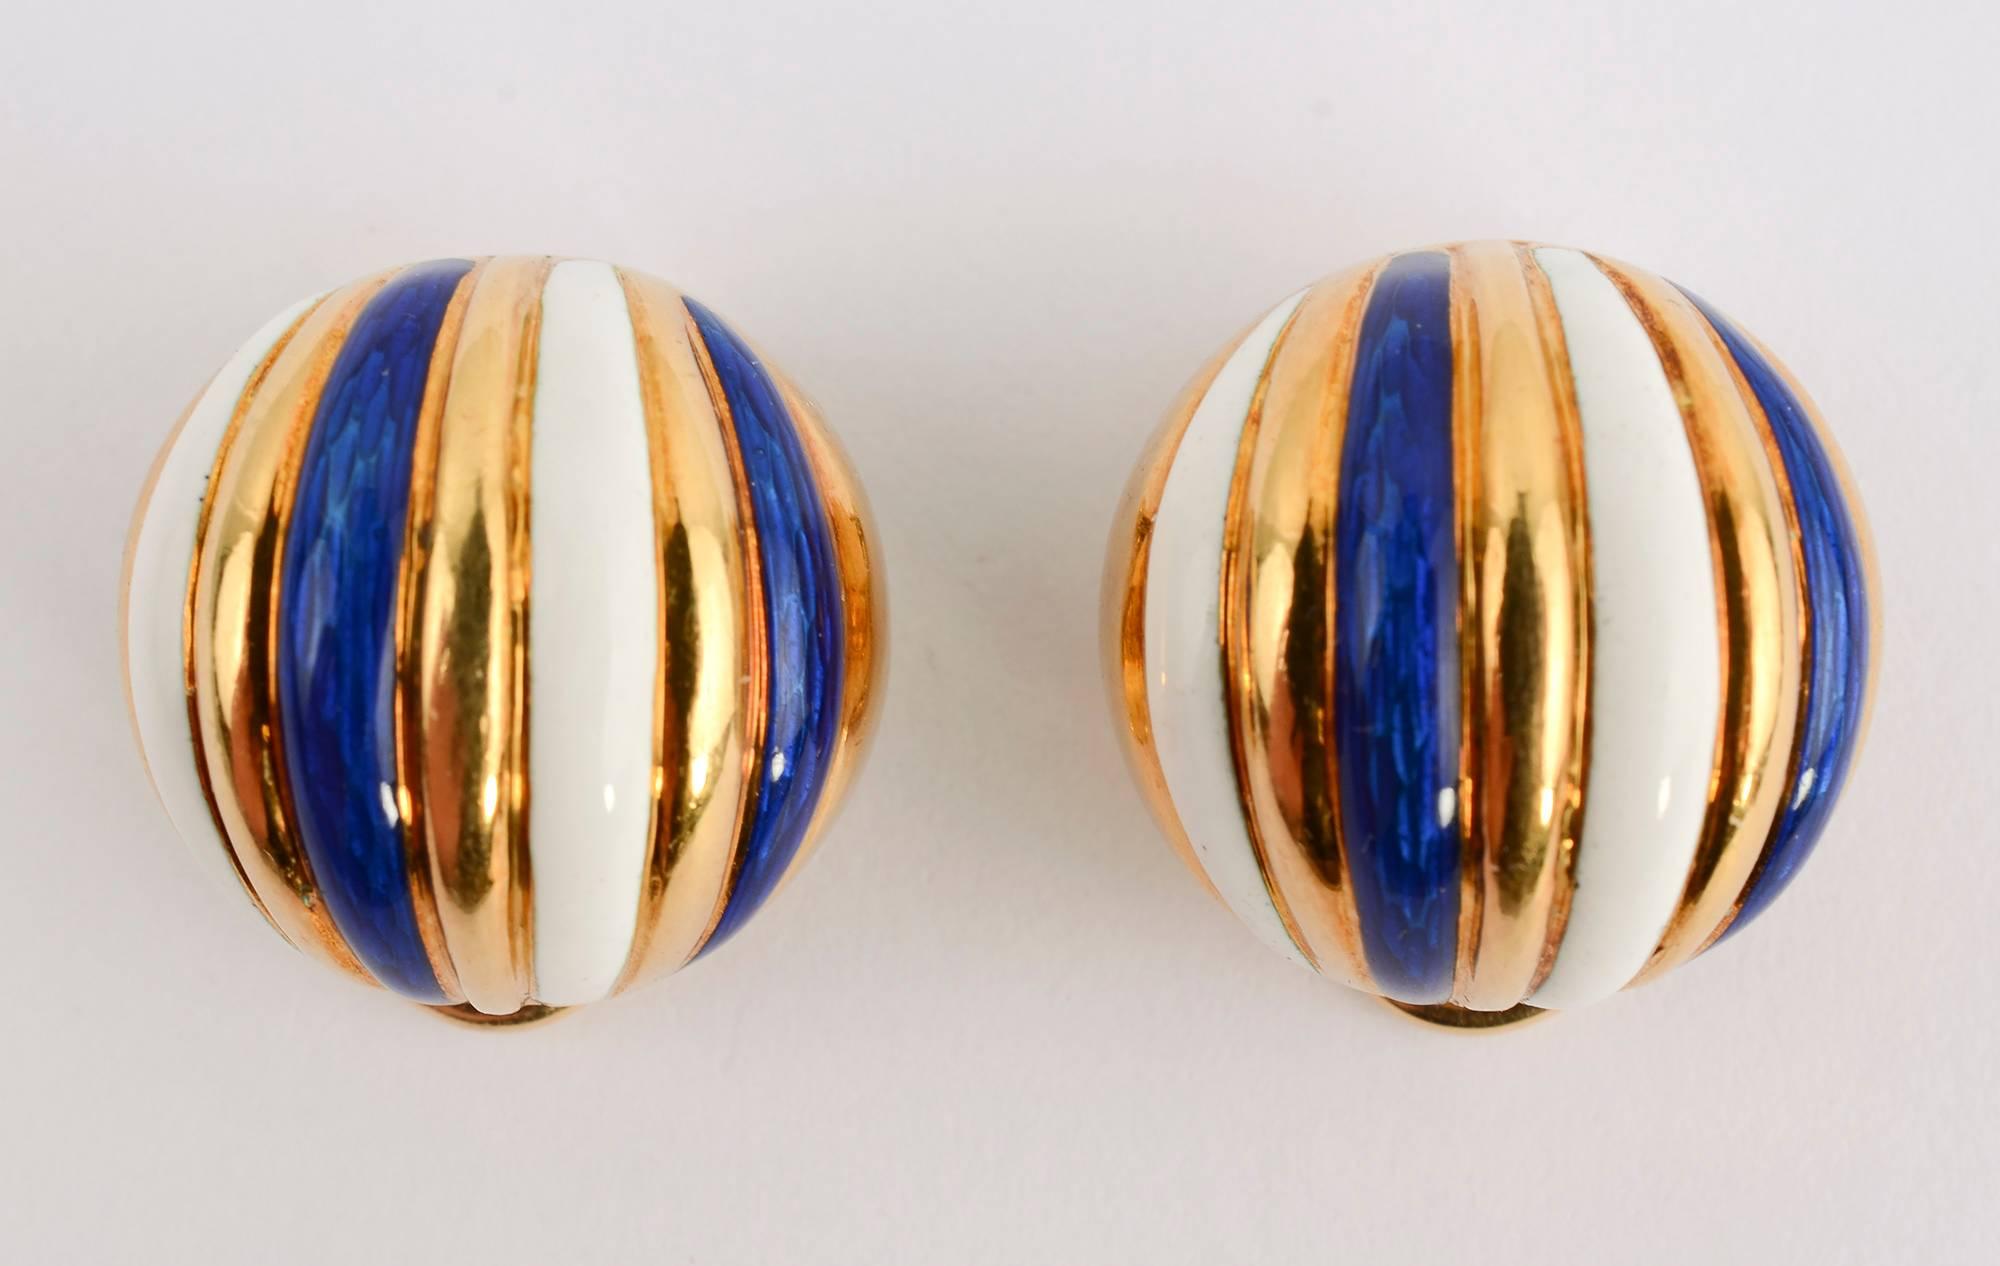 Dome shaped earrings by Tiffany in which bands of  18 karat gold alternate with bands of blue and white enamel. They are 3/4 inch in diameter. Clip backs can be converted to posts.